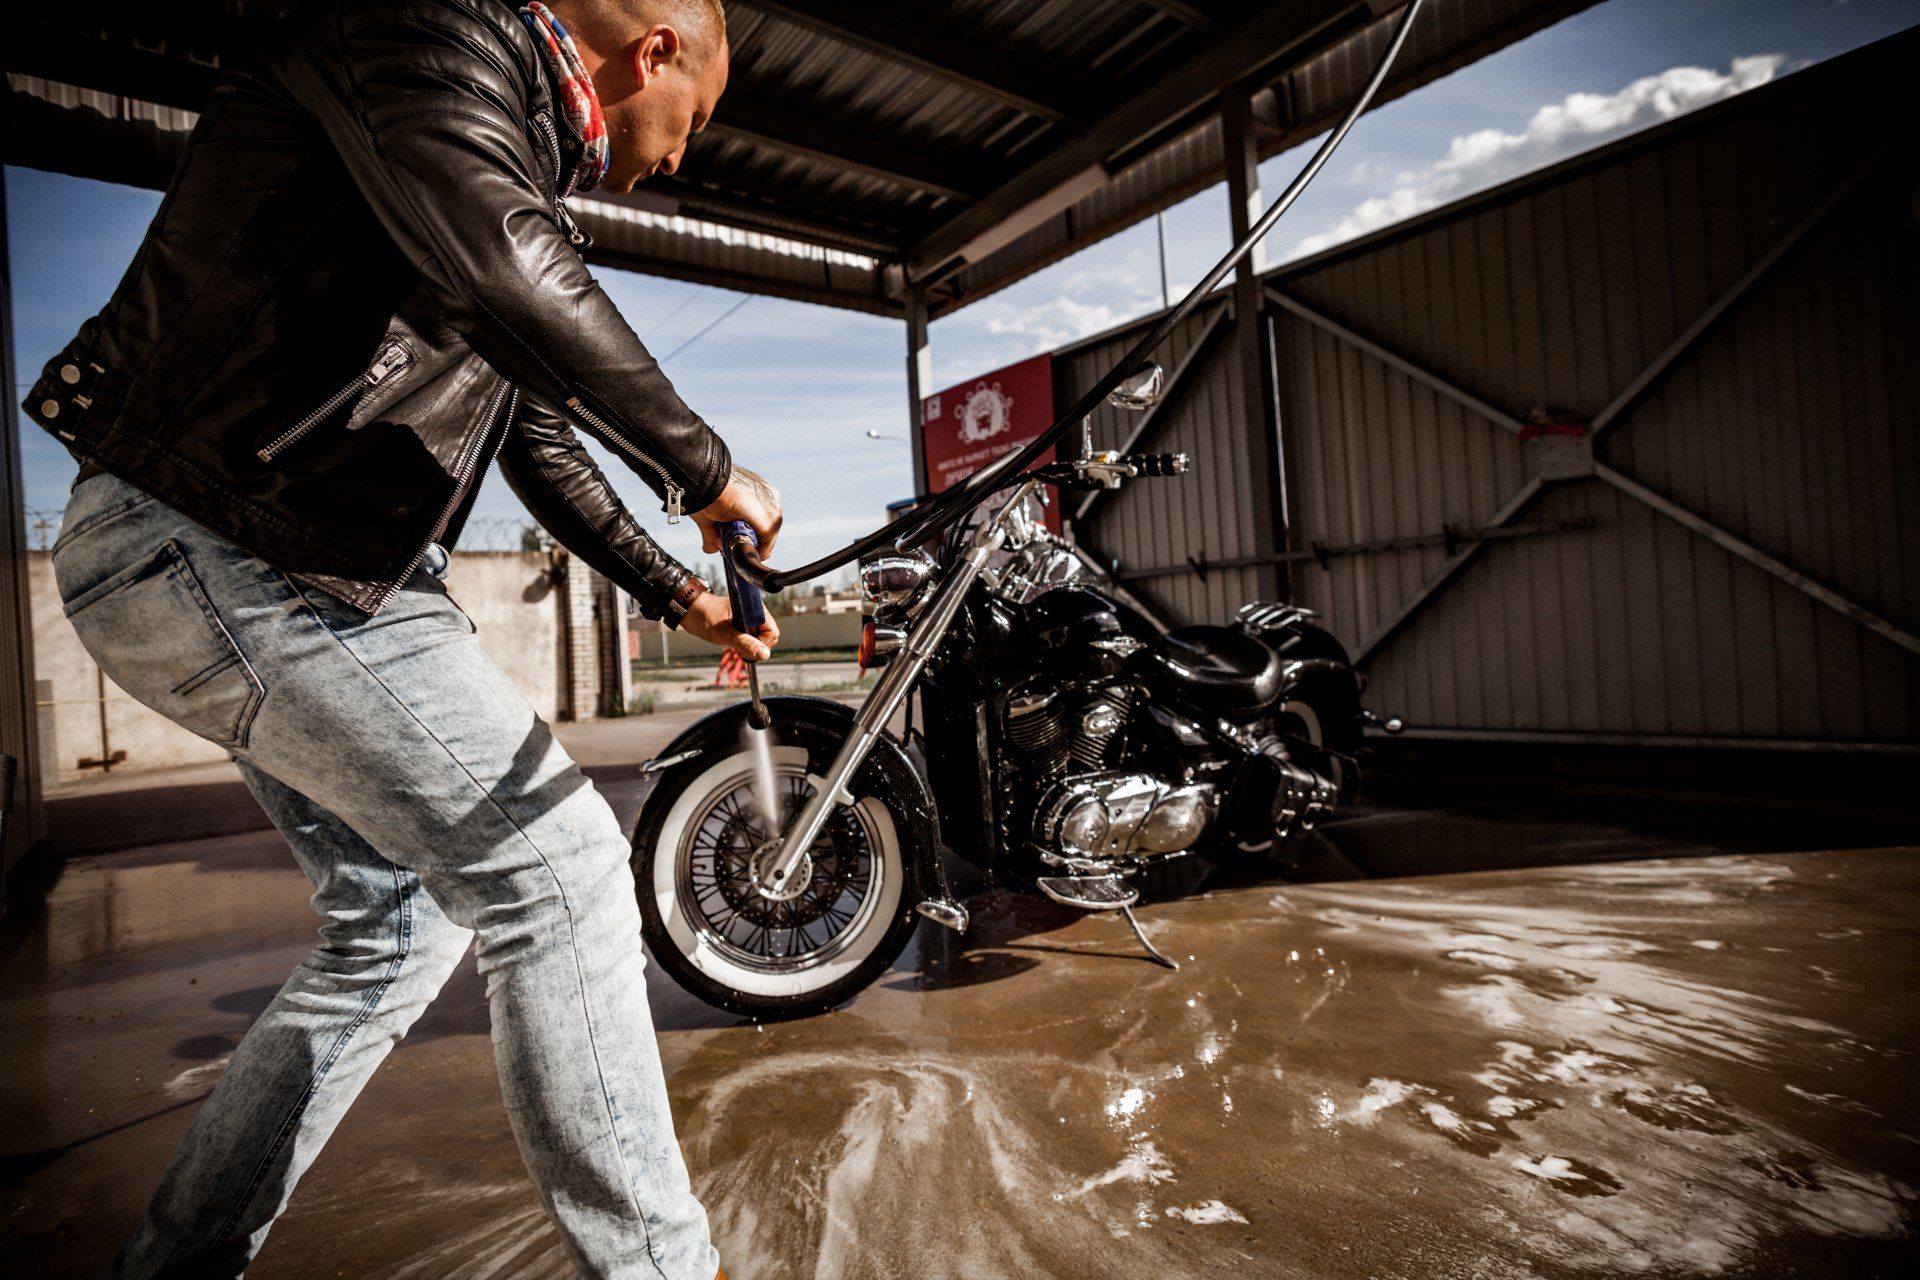 a person cleaning a motorcycle